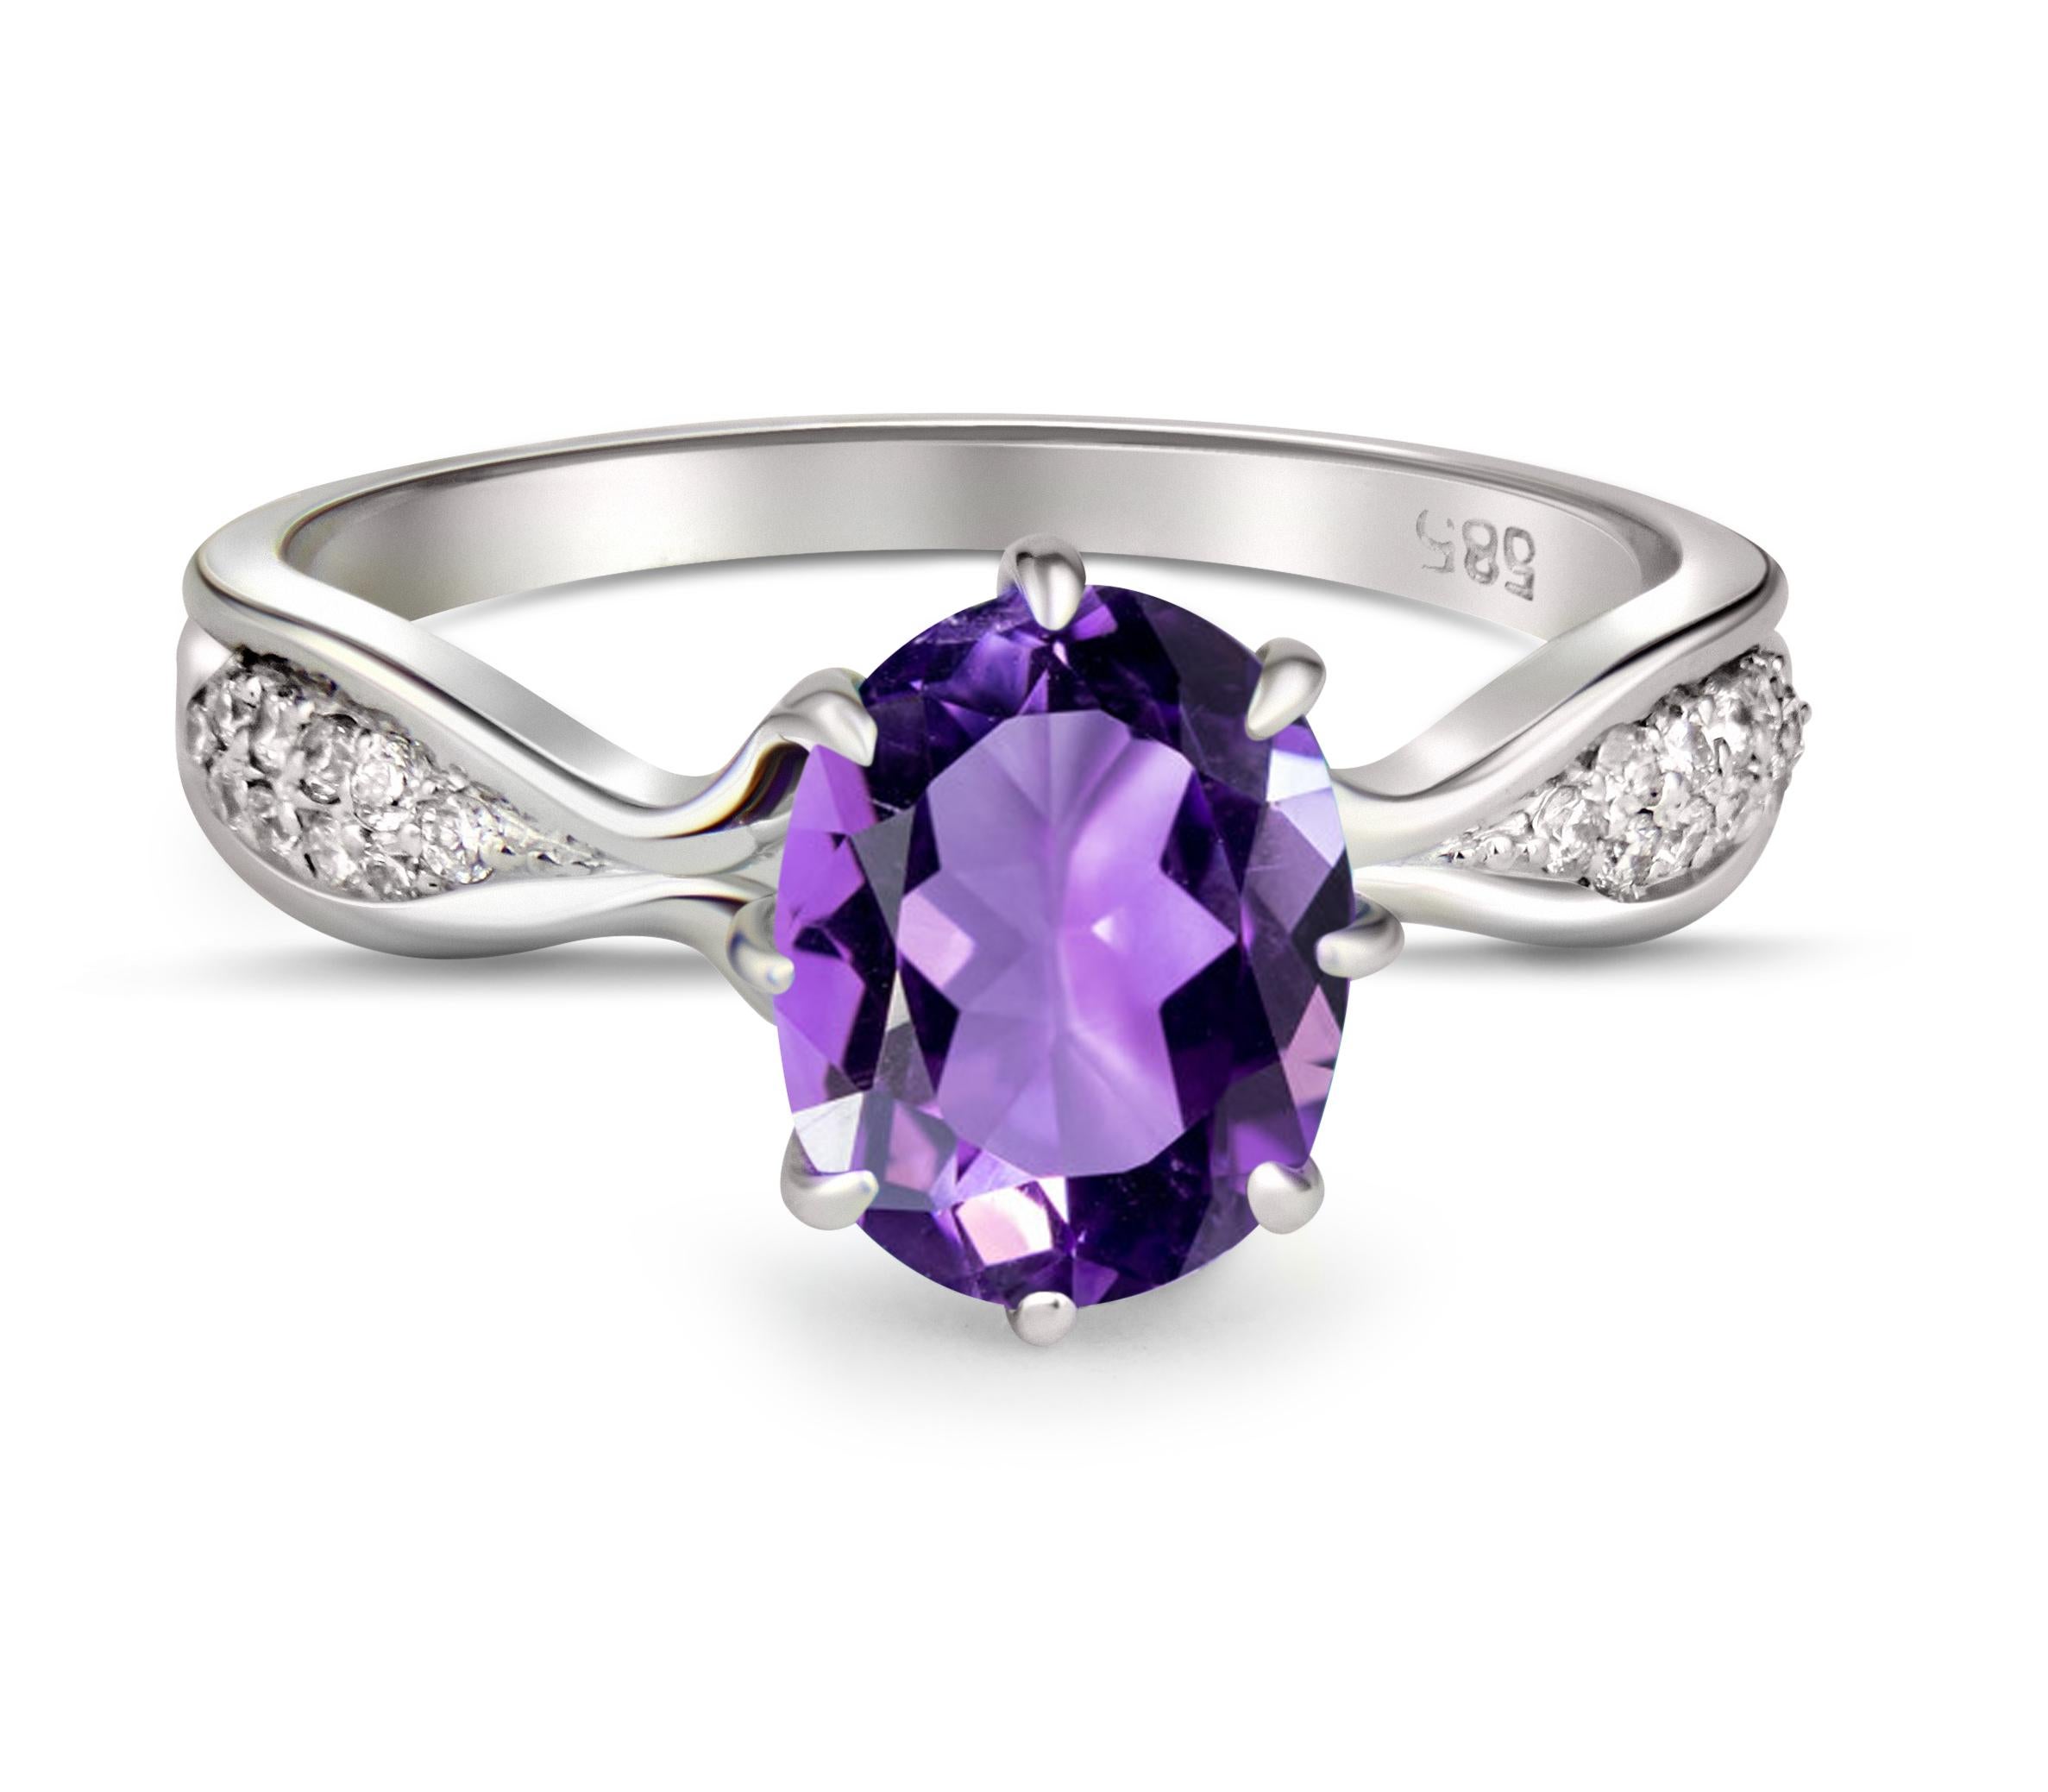 Amethyst 14k gold ring. Oval amethyst ring. Amethyst gold ring. Amethyst vintage ring. Amethyst engagement ring. February birthstone ring. Purple gem ring. Amethyst gold jewellery. 
 
Metal: 14k solid gold
Weight: 2.1 g (depends from size)
Main